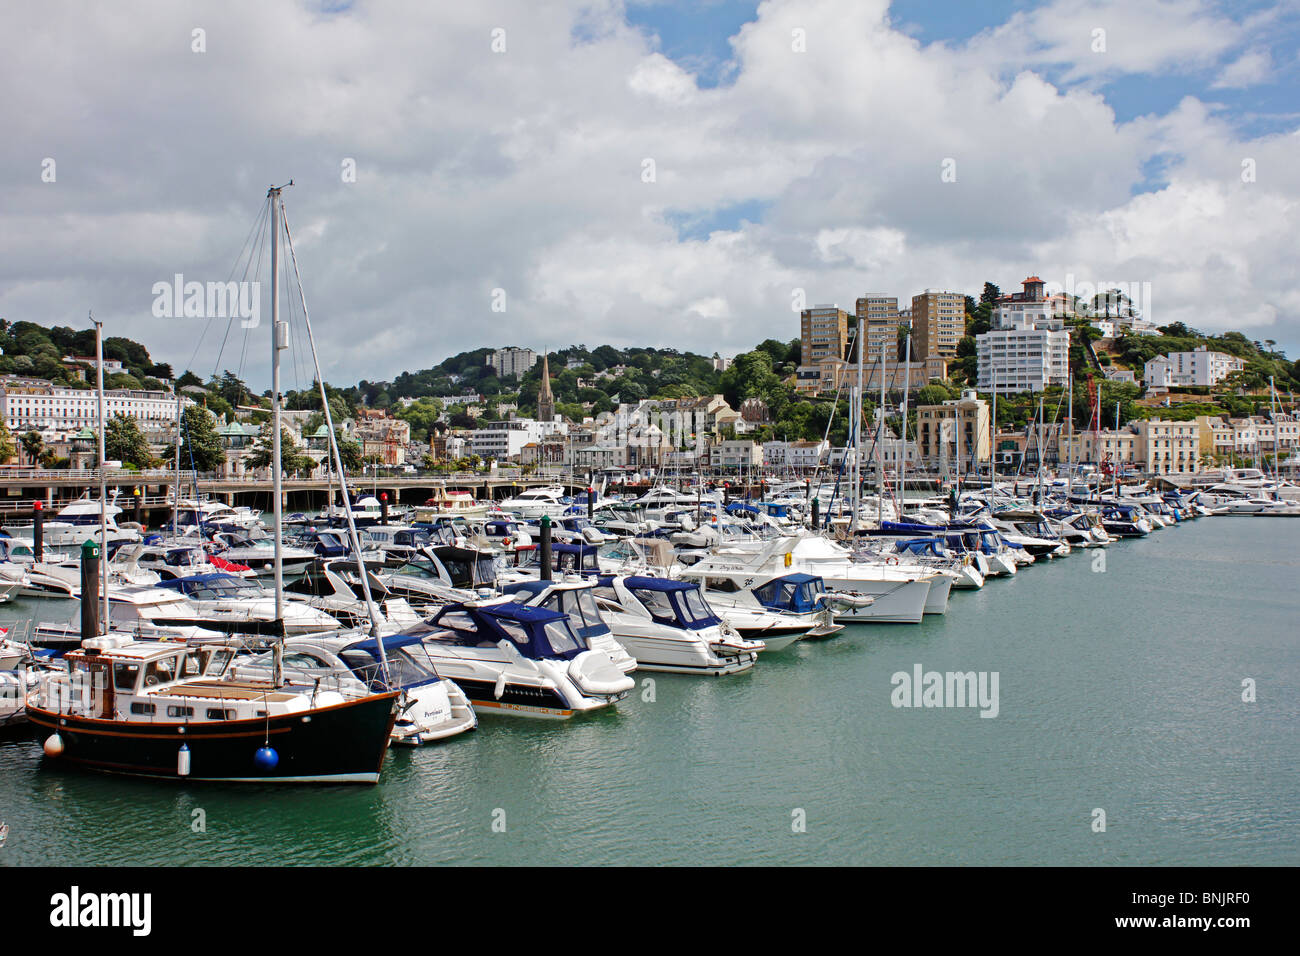 Boats moored in the harbour at the seaside holiday resort of Torquay in Devon Stock Photo